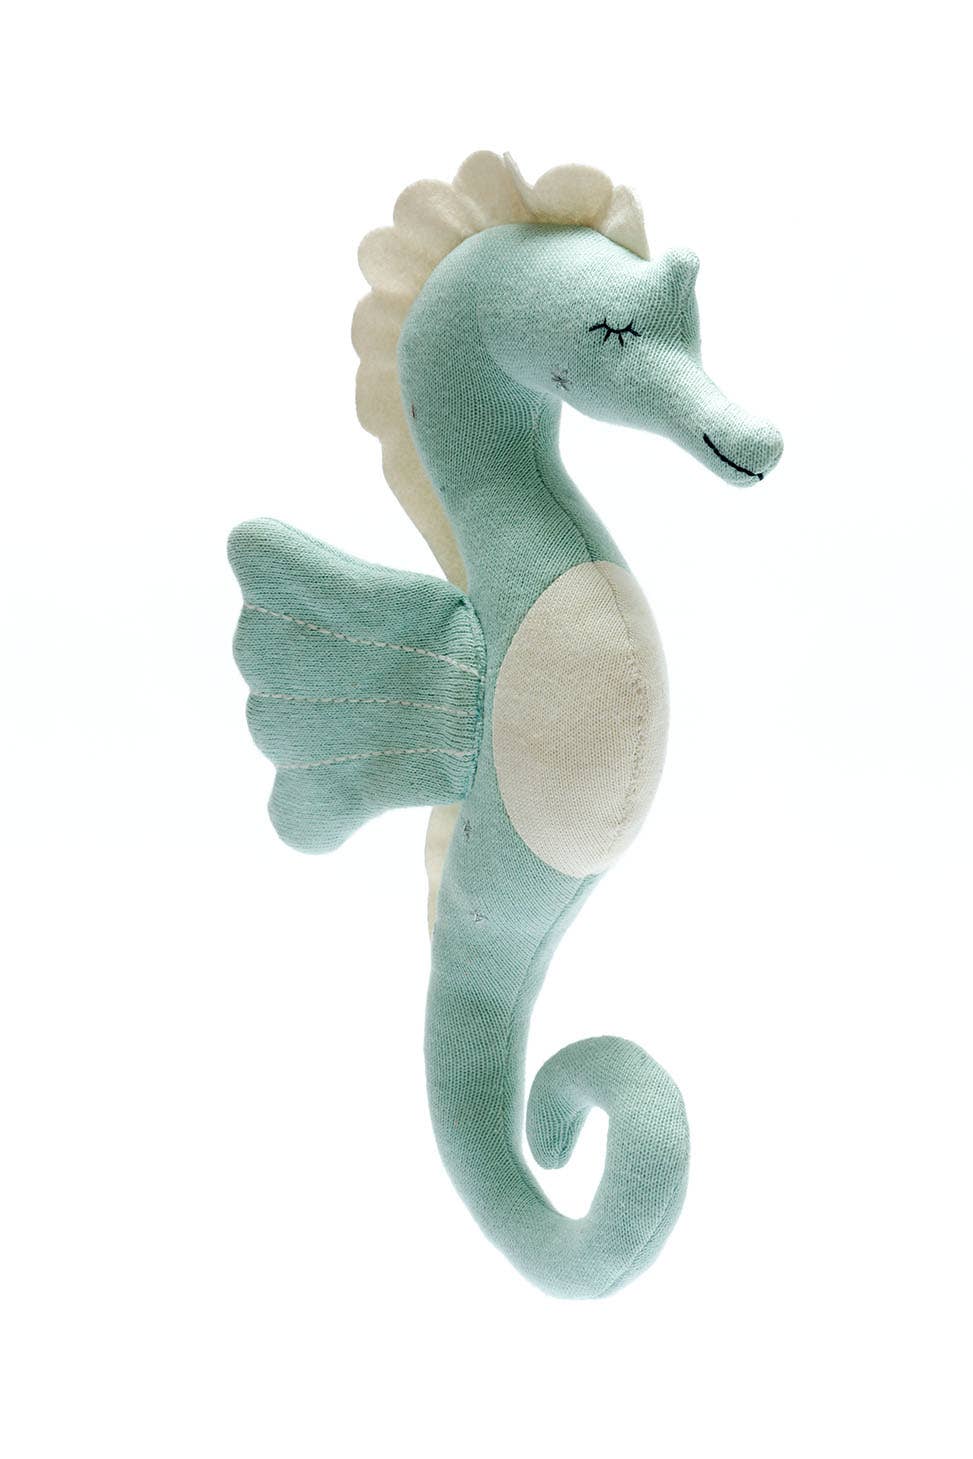 Tactile Knitted Seahorse Plush Toy Organic Cotton Sea Green